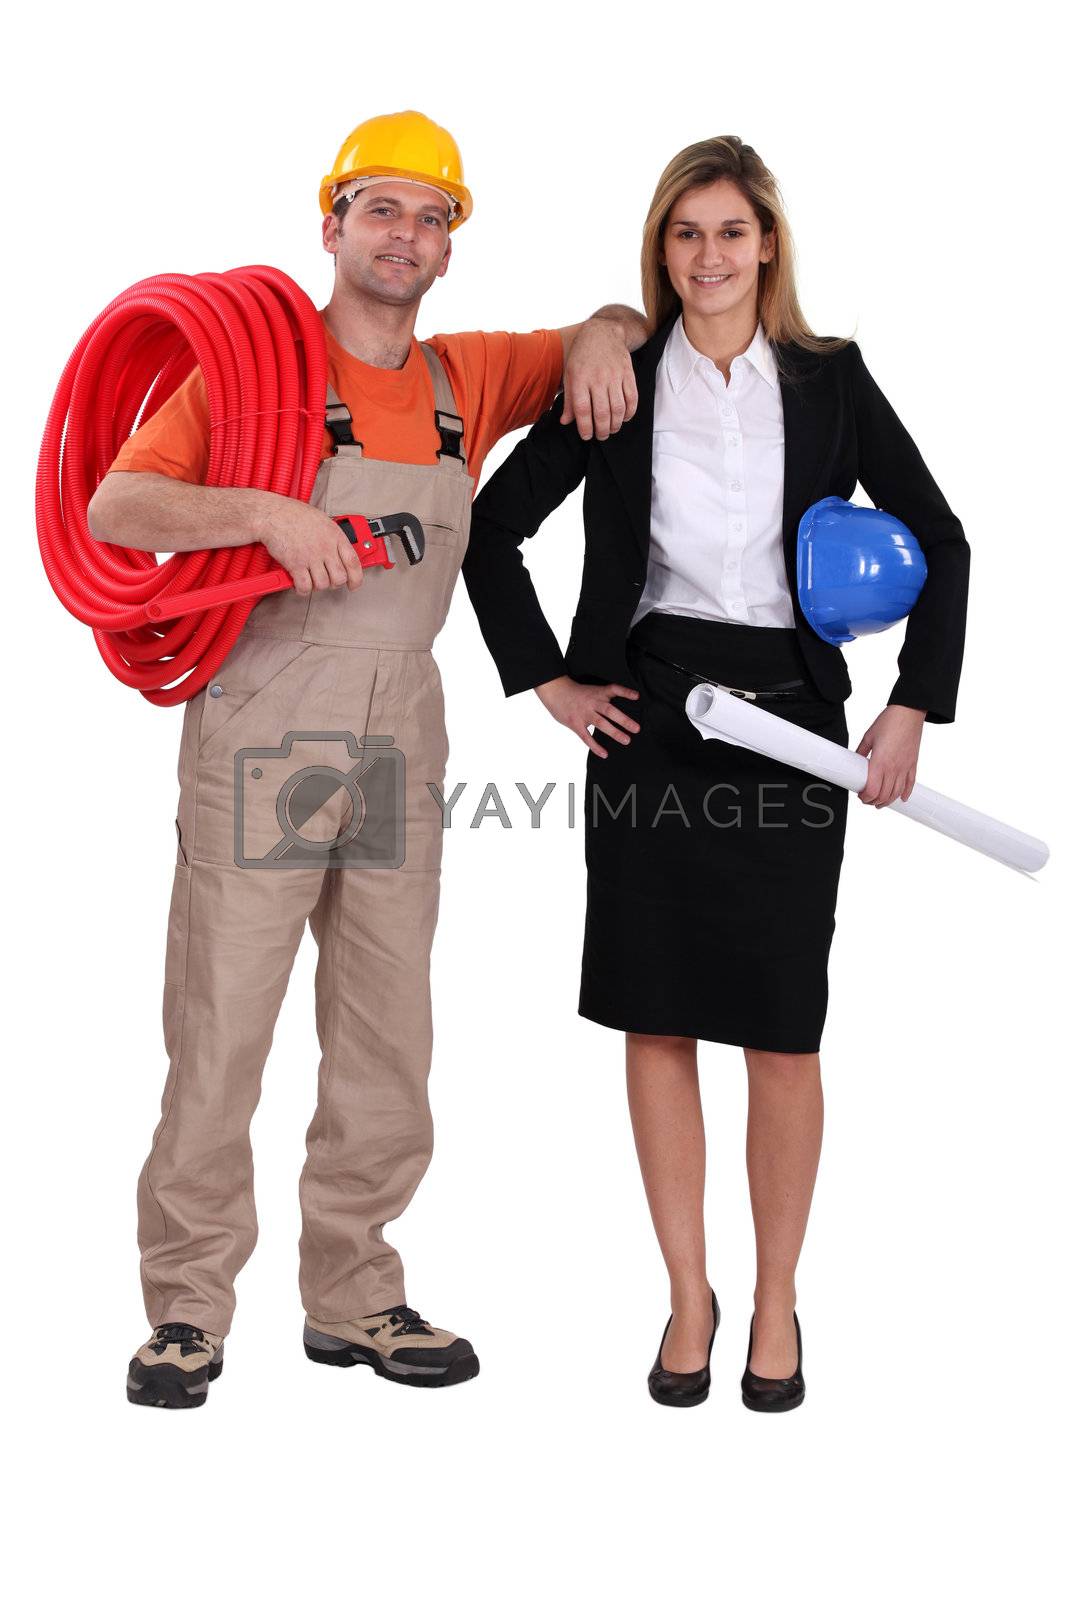 Royalty free image of Plumber and architect by phovoir